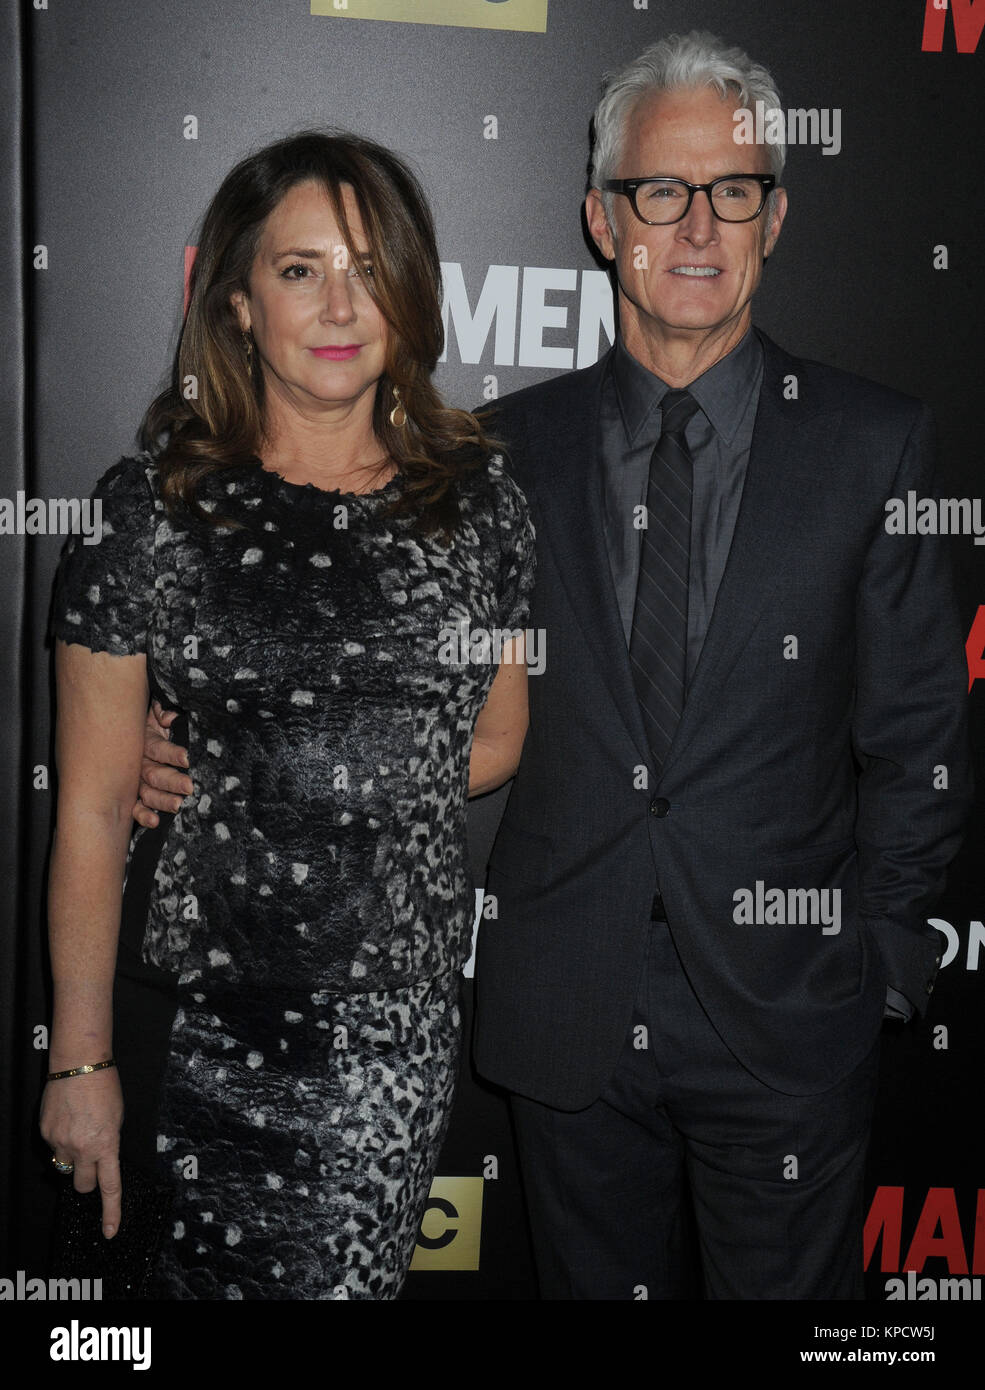 NEW YORK, NY - MARCH 22: Talia Balsam, John Slattery  attends the 'Mad Men' New York special screening at The Museum of Modern Art on March 22, 2015 in New York City.    People:  Talia Balsam, John Slattery Stock Photo